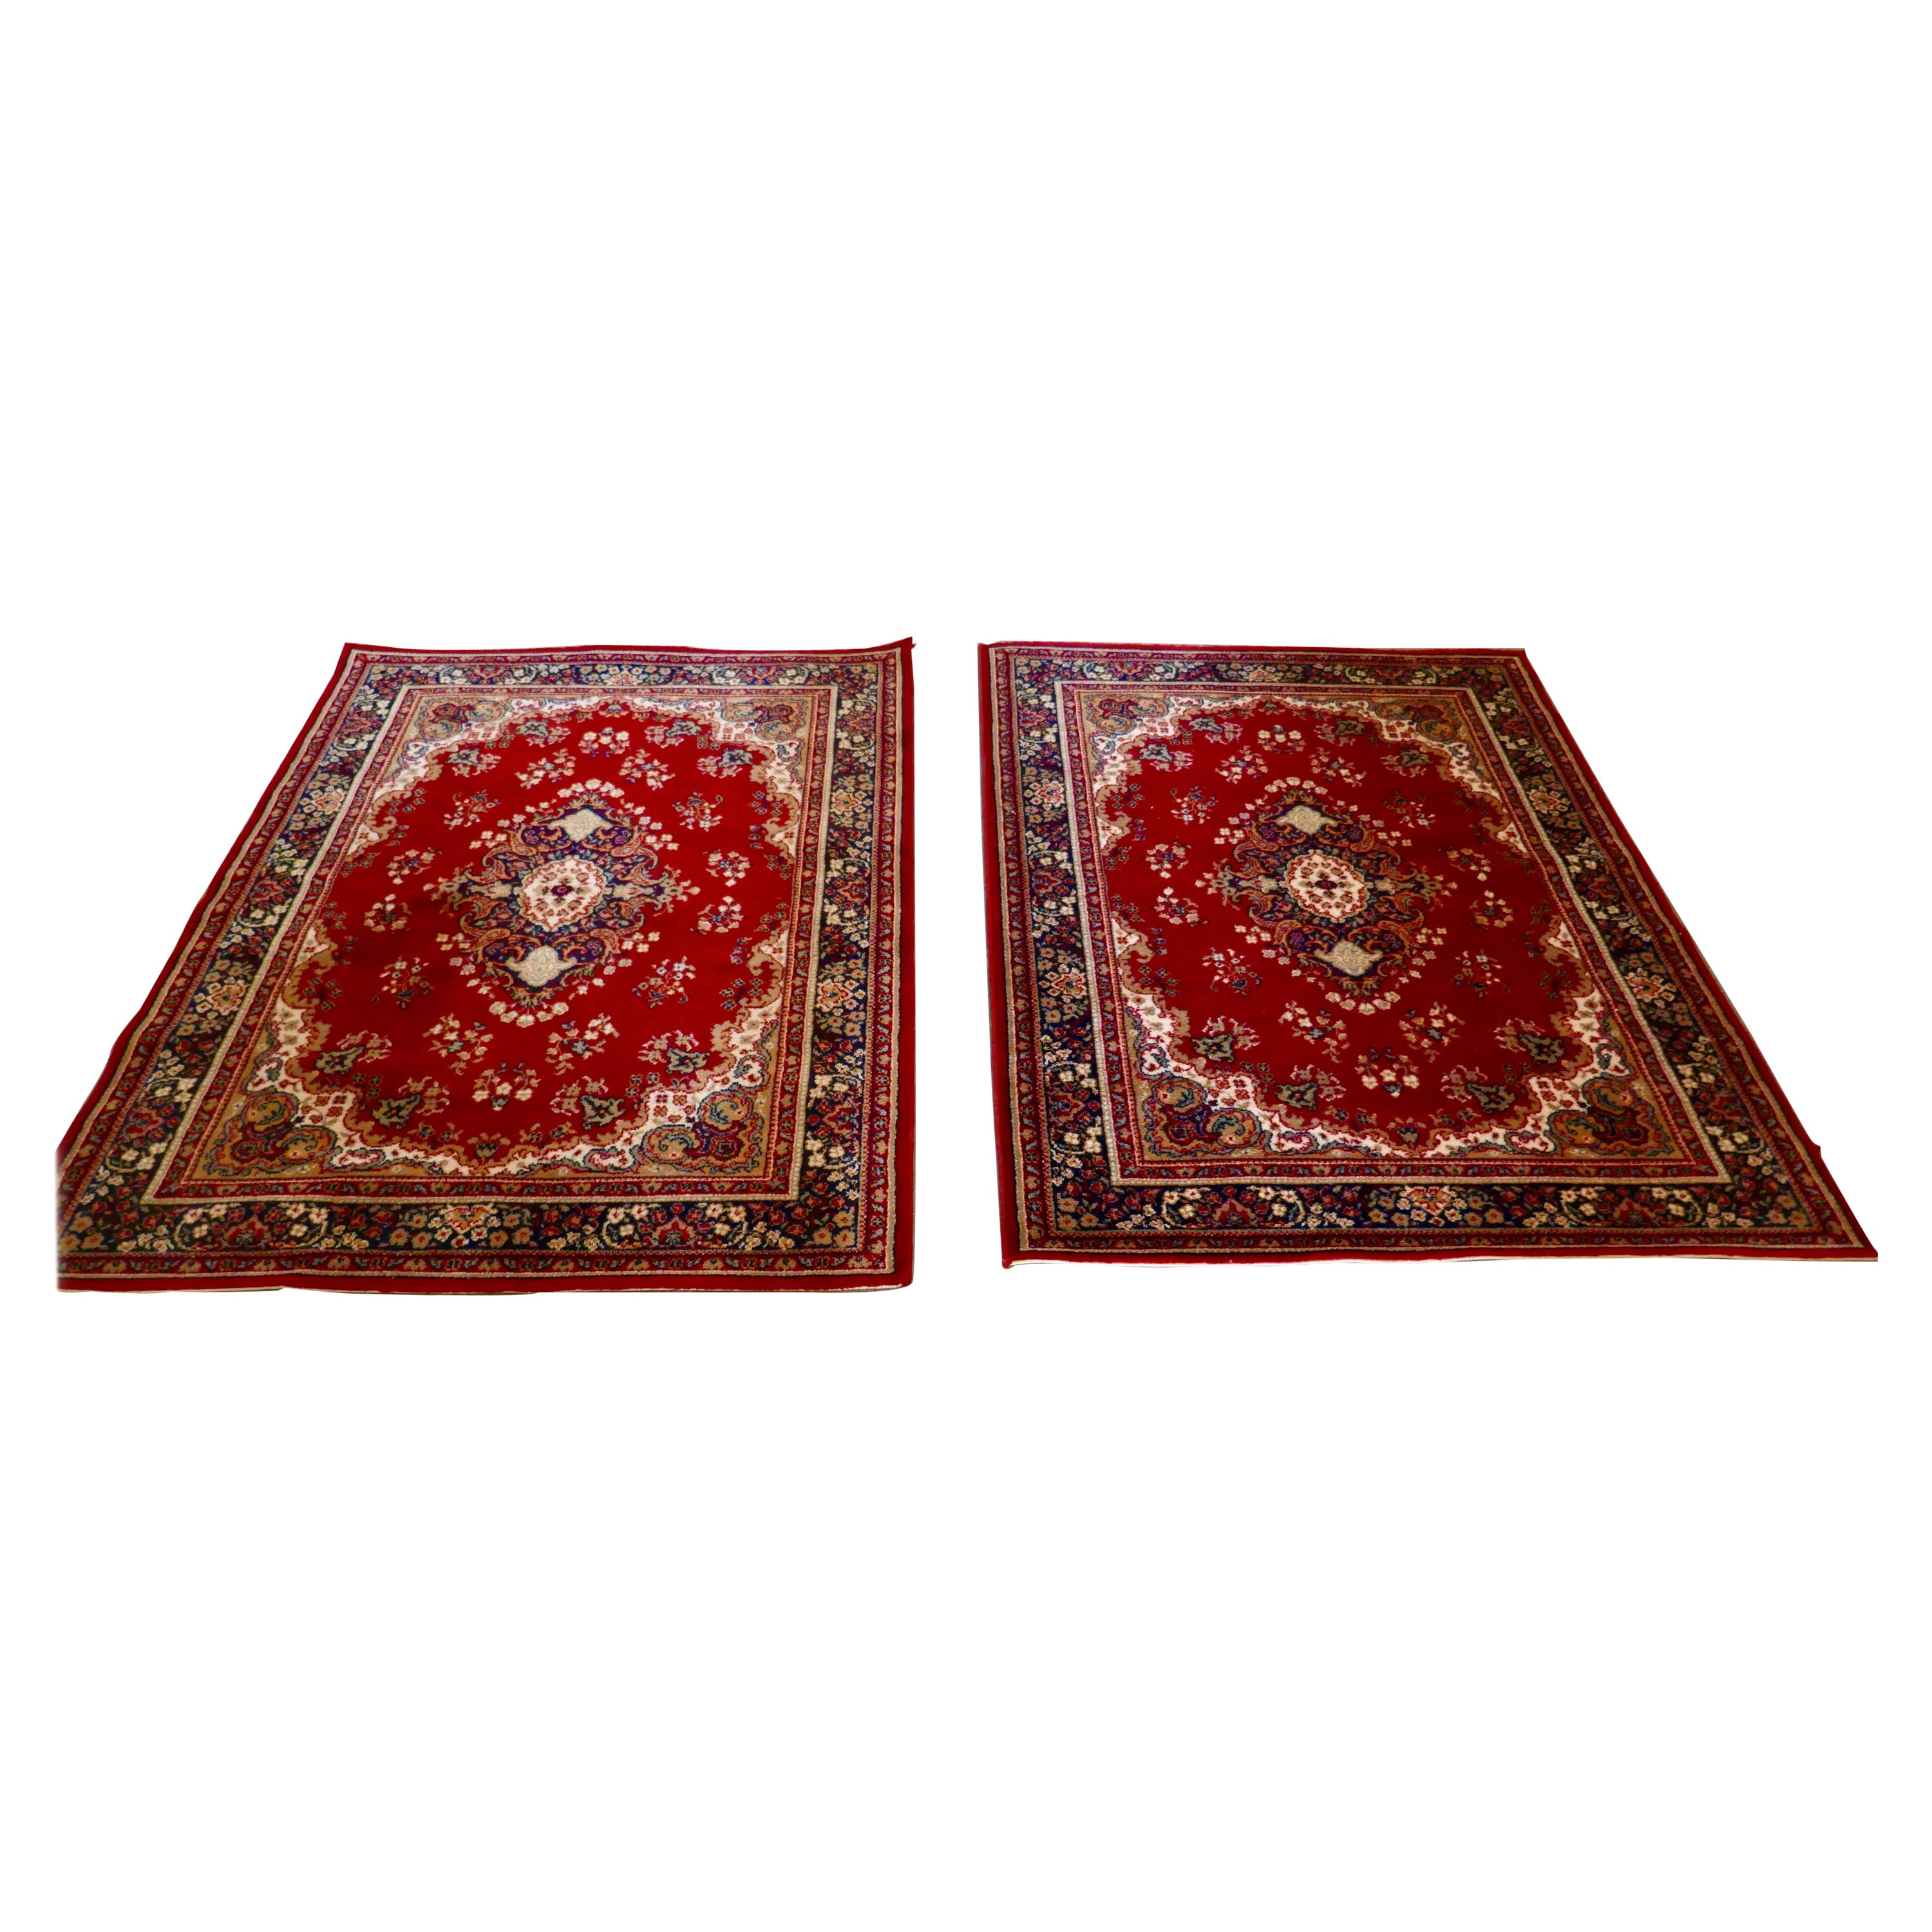 Lovely Pair of Bright Red Wool Rugs For Sale